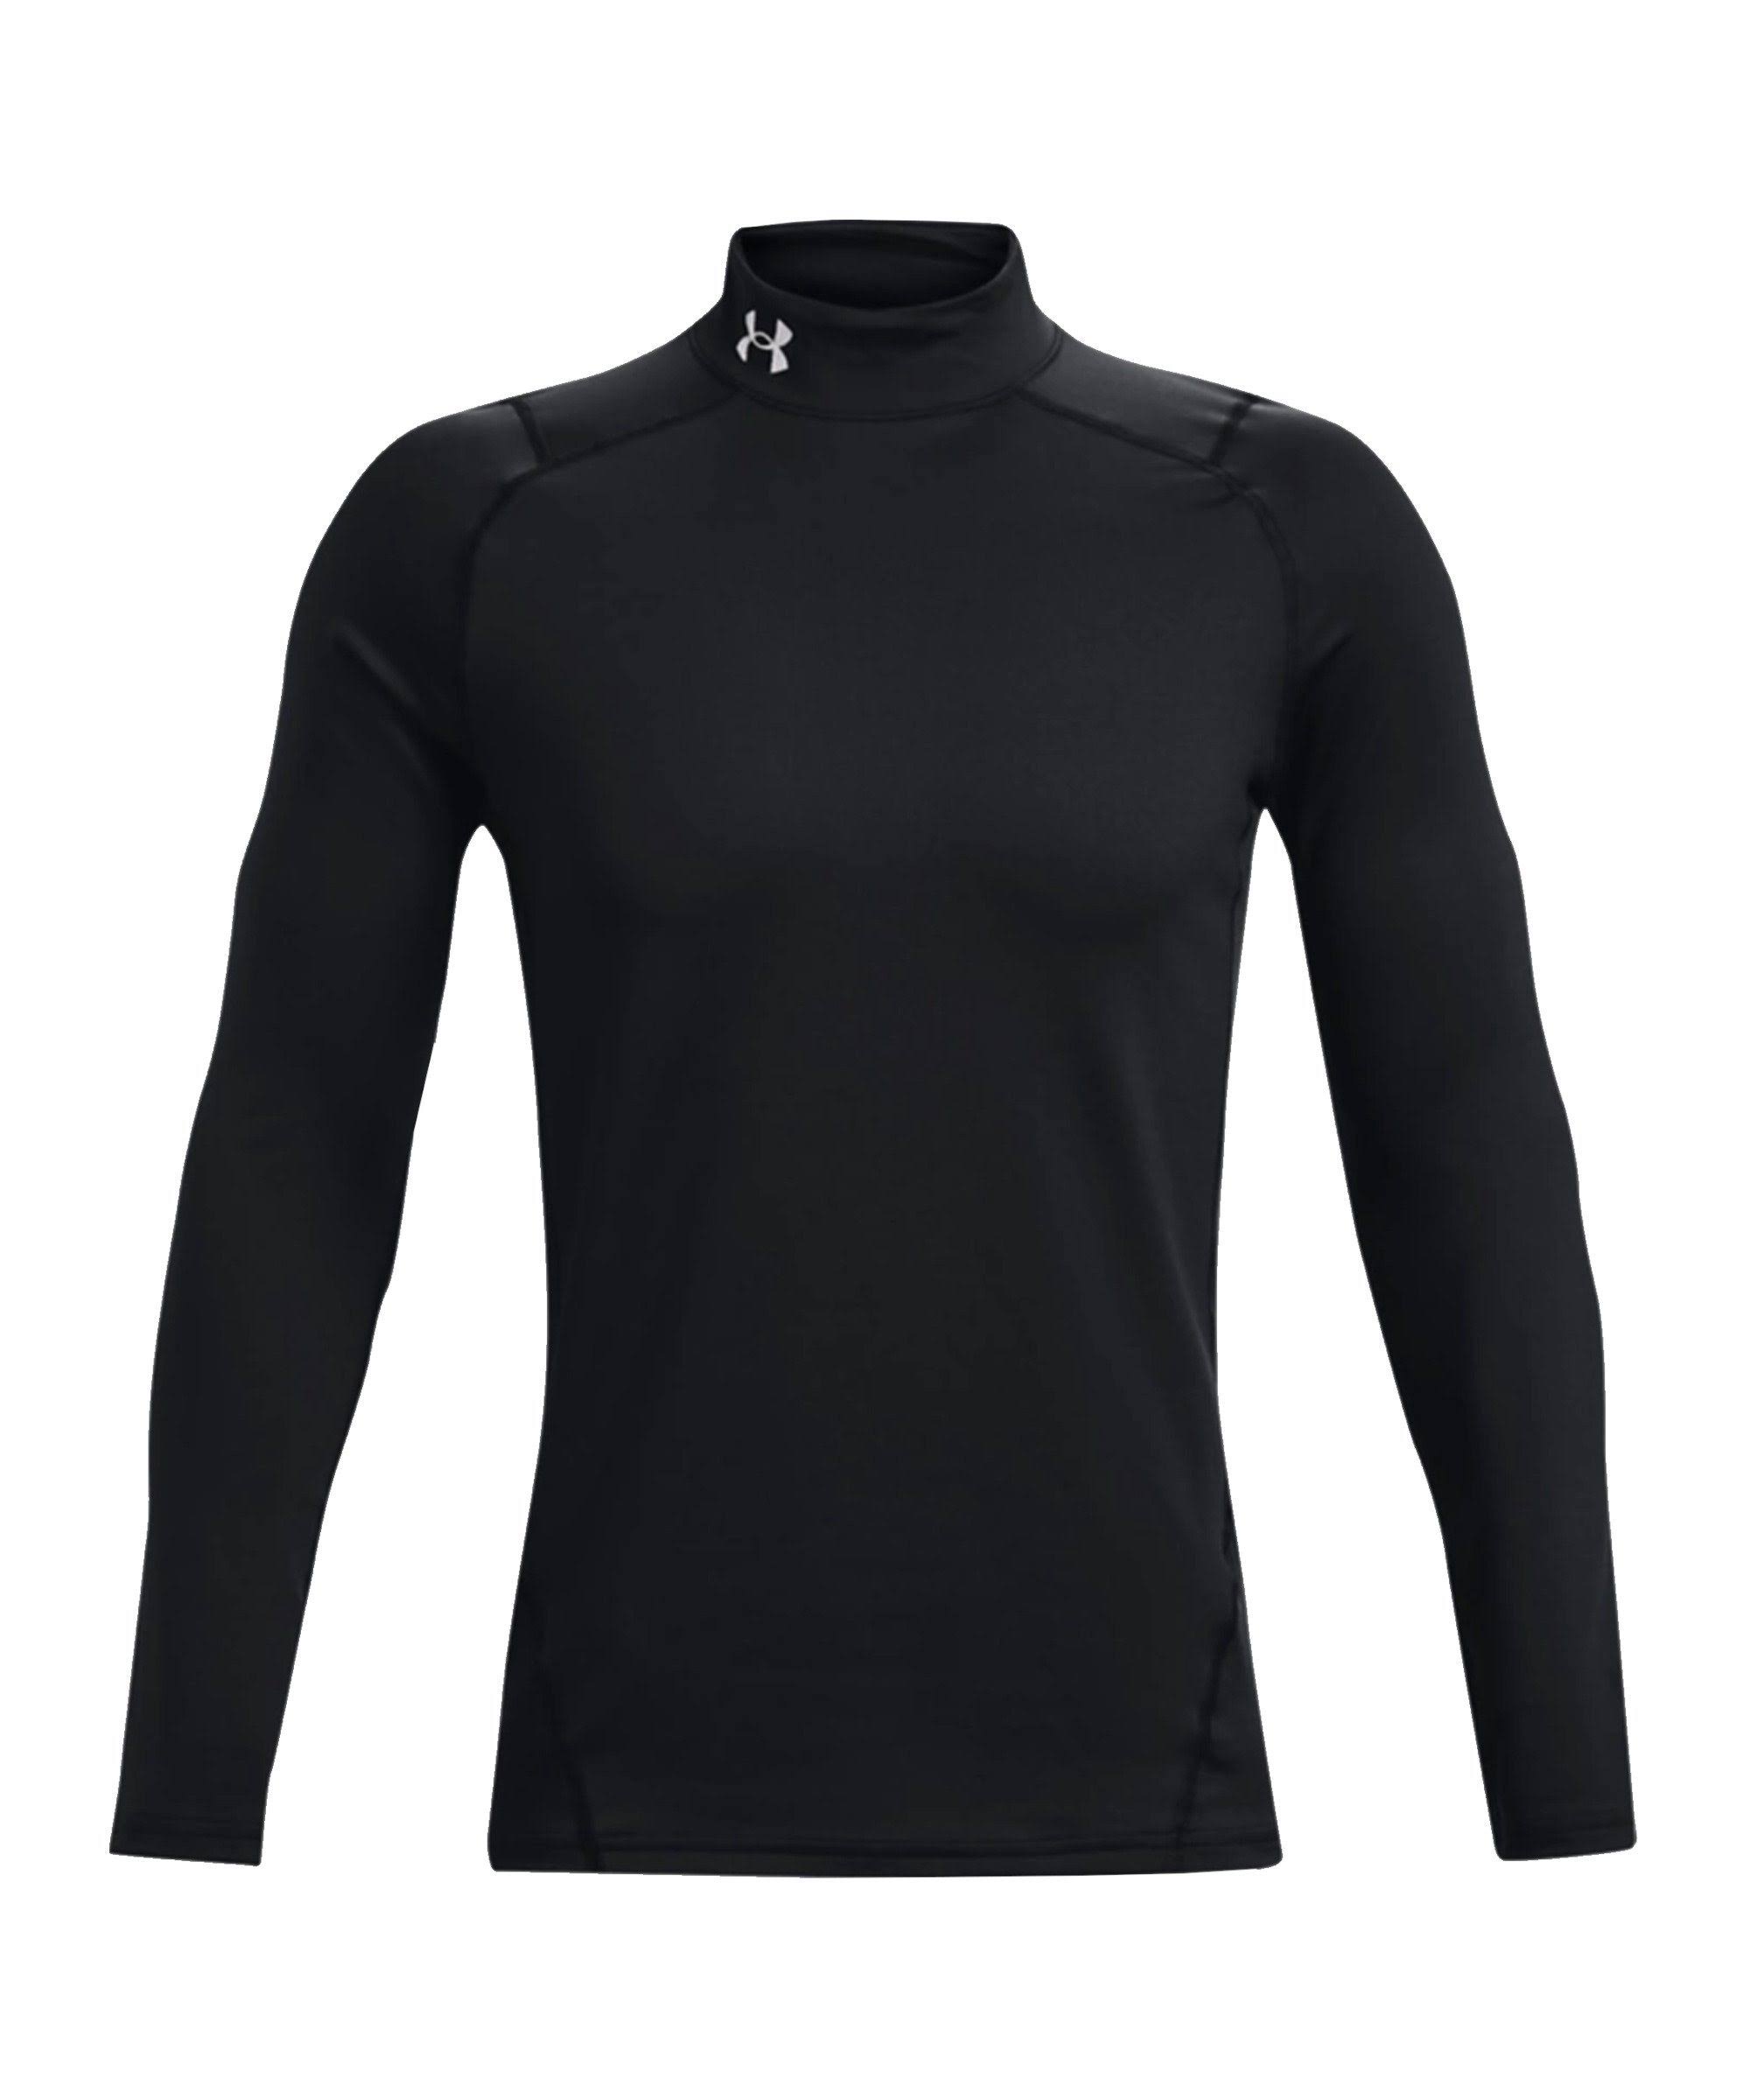 Under Armour ColdGear Armour Fitted Mock Shirt - Black, Small